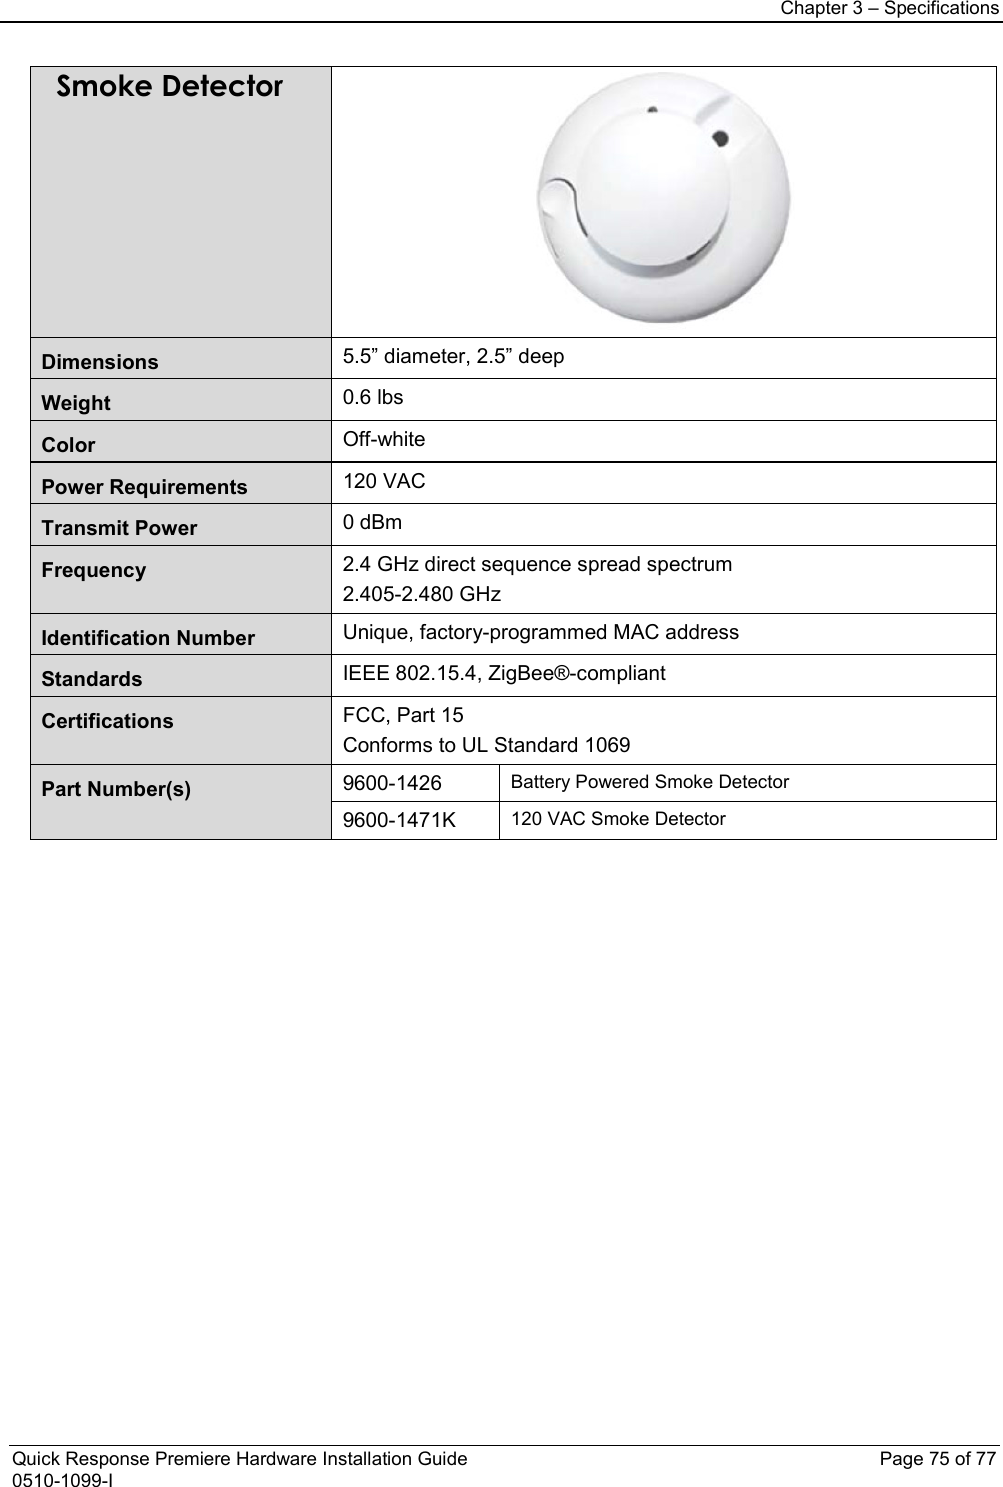 Chapter 3 – Specifications  Quick Response Premiere Hardware Installation Guide    Page 75 of 77 0510-1099-I Smoke Detector  Dimensions 5.5” diameter, 2.5” deep Weight 0.6 lbs Color Off-white Power Requirements 120 VAC Transmit Power 0 dBm Frequency 2.4 GHz direct sequence spread spectrum 2.405-2.480 GHz Identification Number Unique, factory-programmed MAC address Standards IEEE 802.15.4, ZigBee®-compliant Certifications FCC, Part 15 Conforms to UL Standard 1069 Part Number(s)  9600-1426 Battery Powered Smoke Detector 9600-1471K 120 VAC Smoke Detector                        